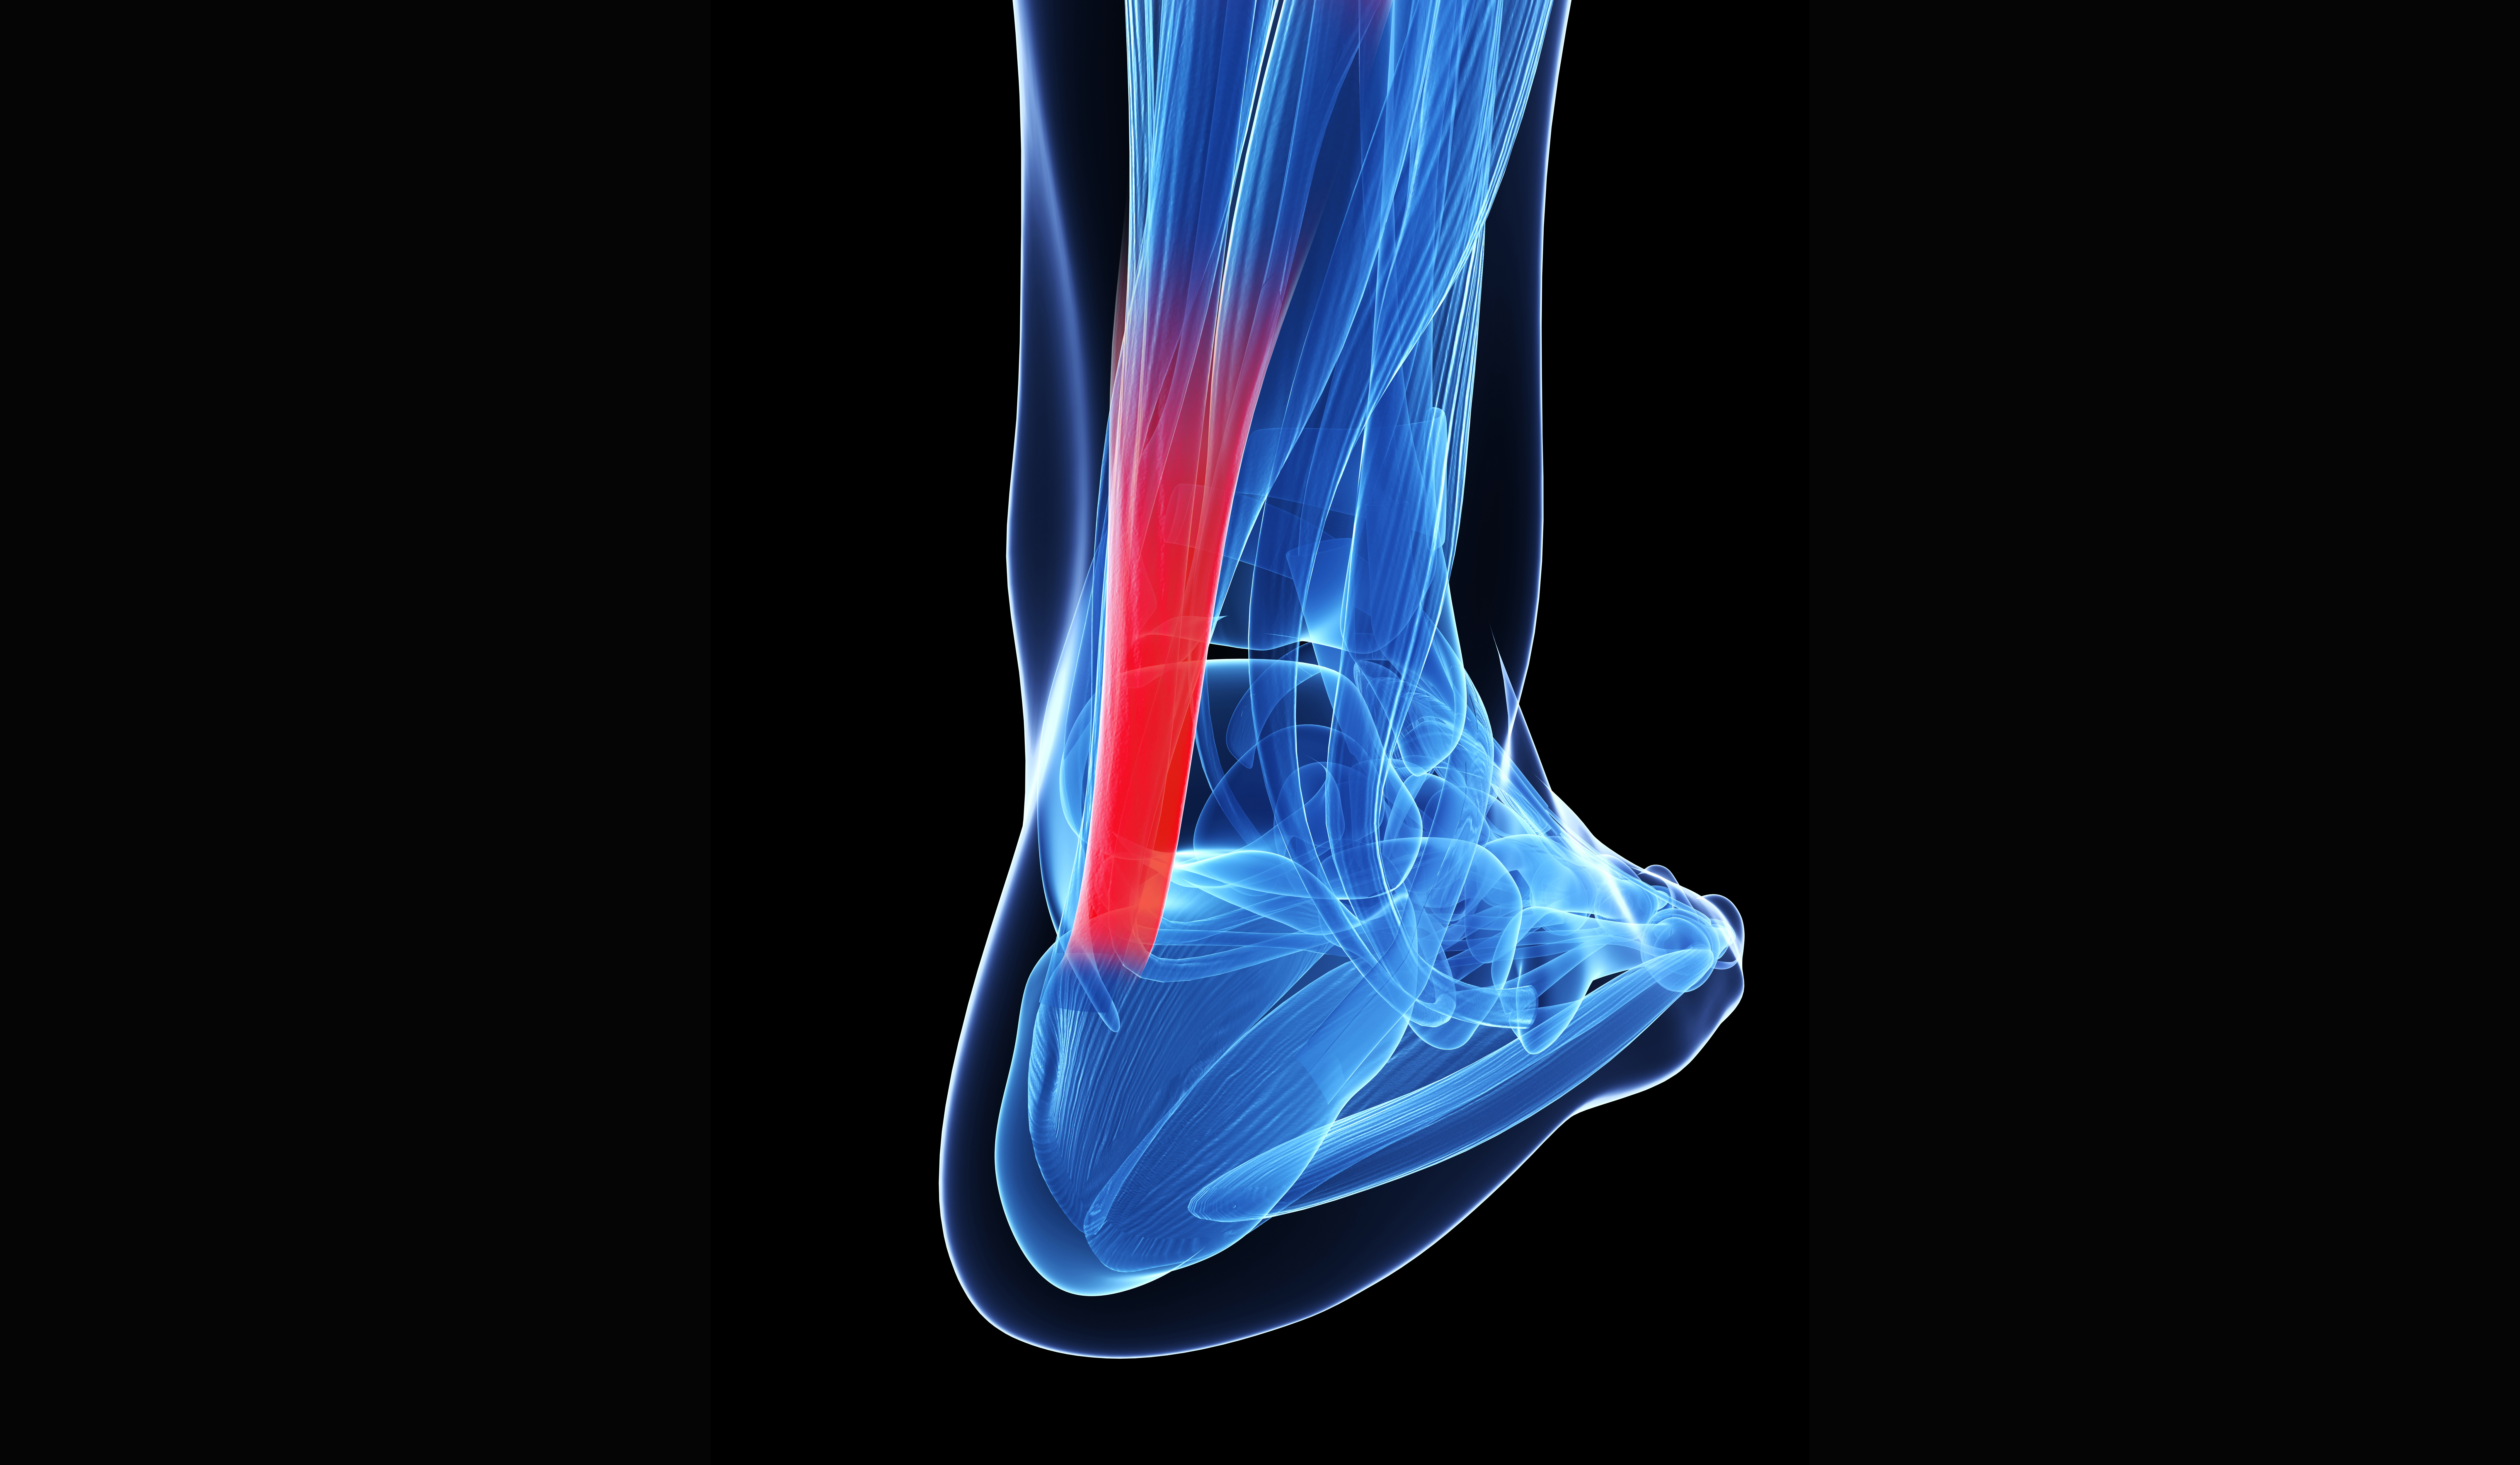 3D illustration of the achilles tendon in human foot